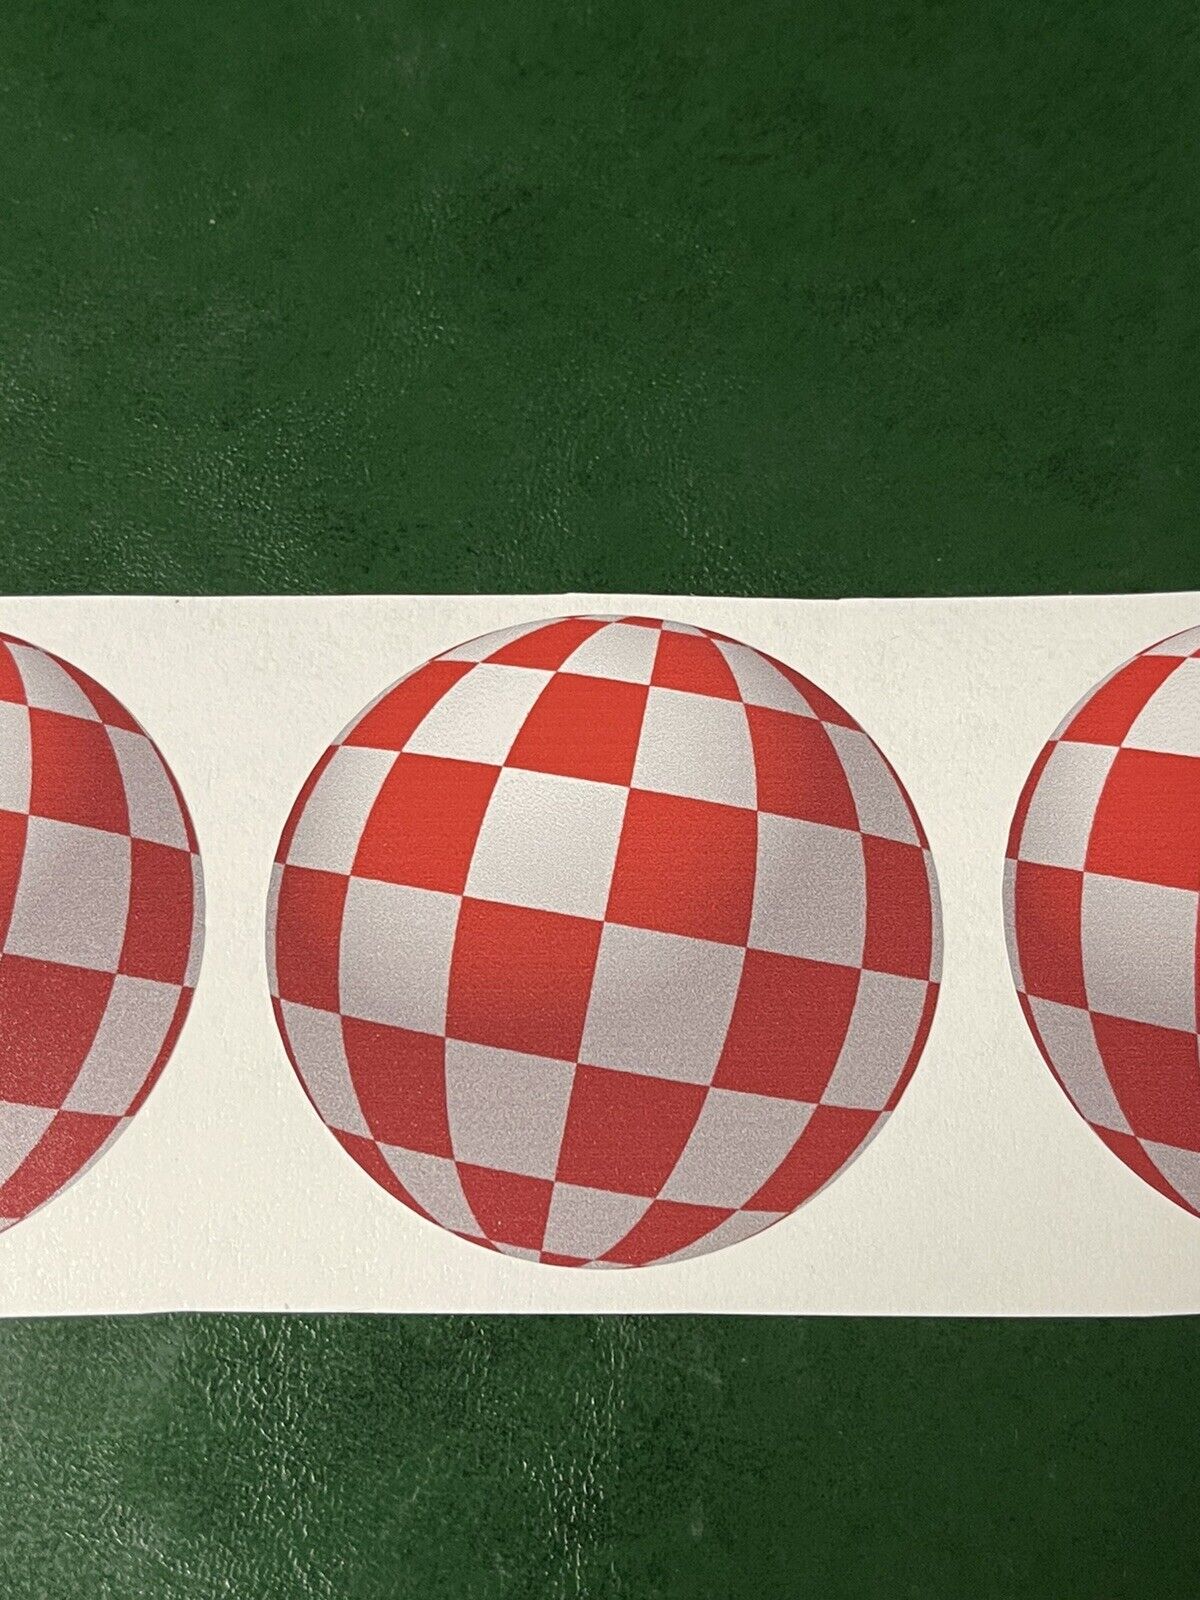 Commodore Amiga Boing Ball Decal Qty. 3